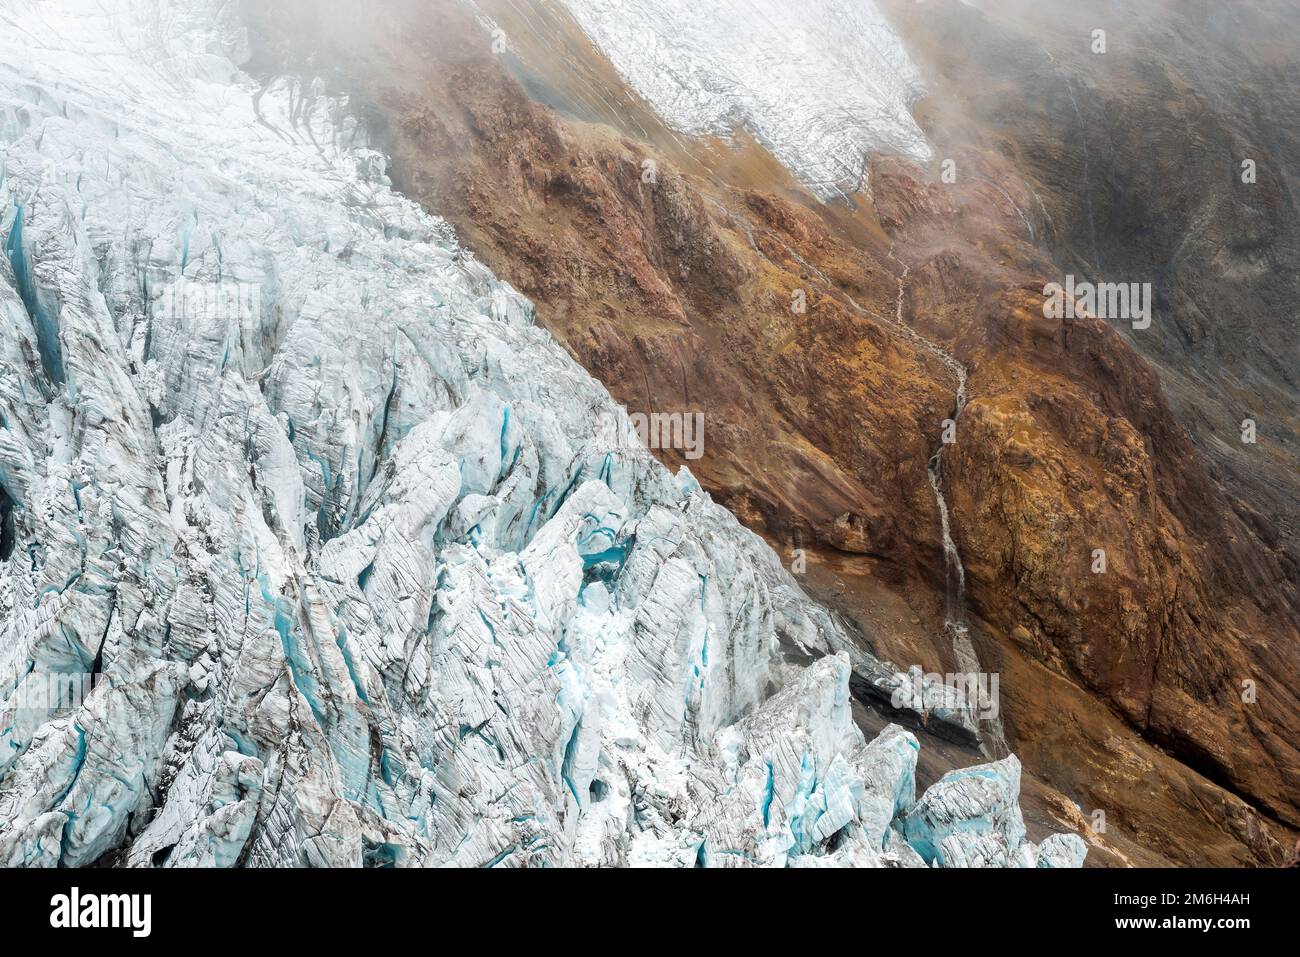 Glacier of the Cayambe volcano with waterfall of melting water in the mist, Andes mountains, Ecuador. Stock Photo